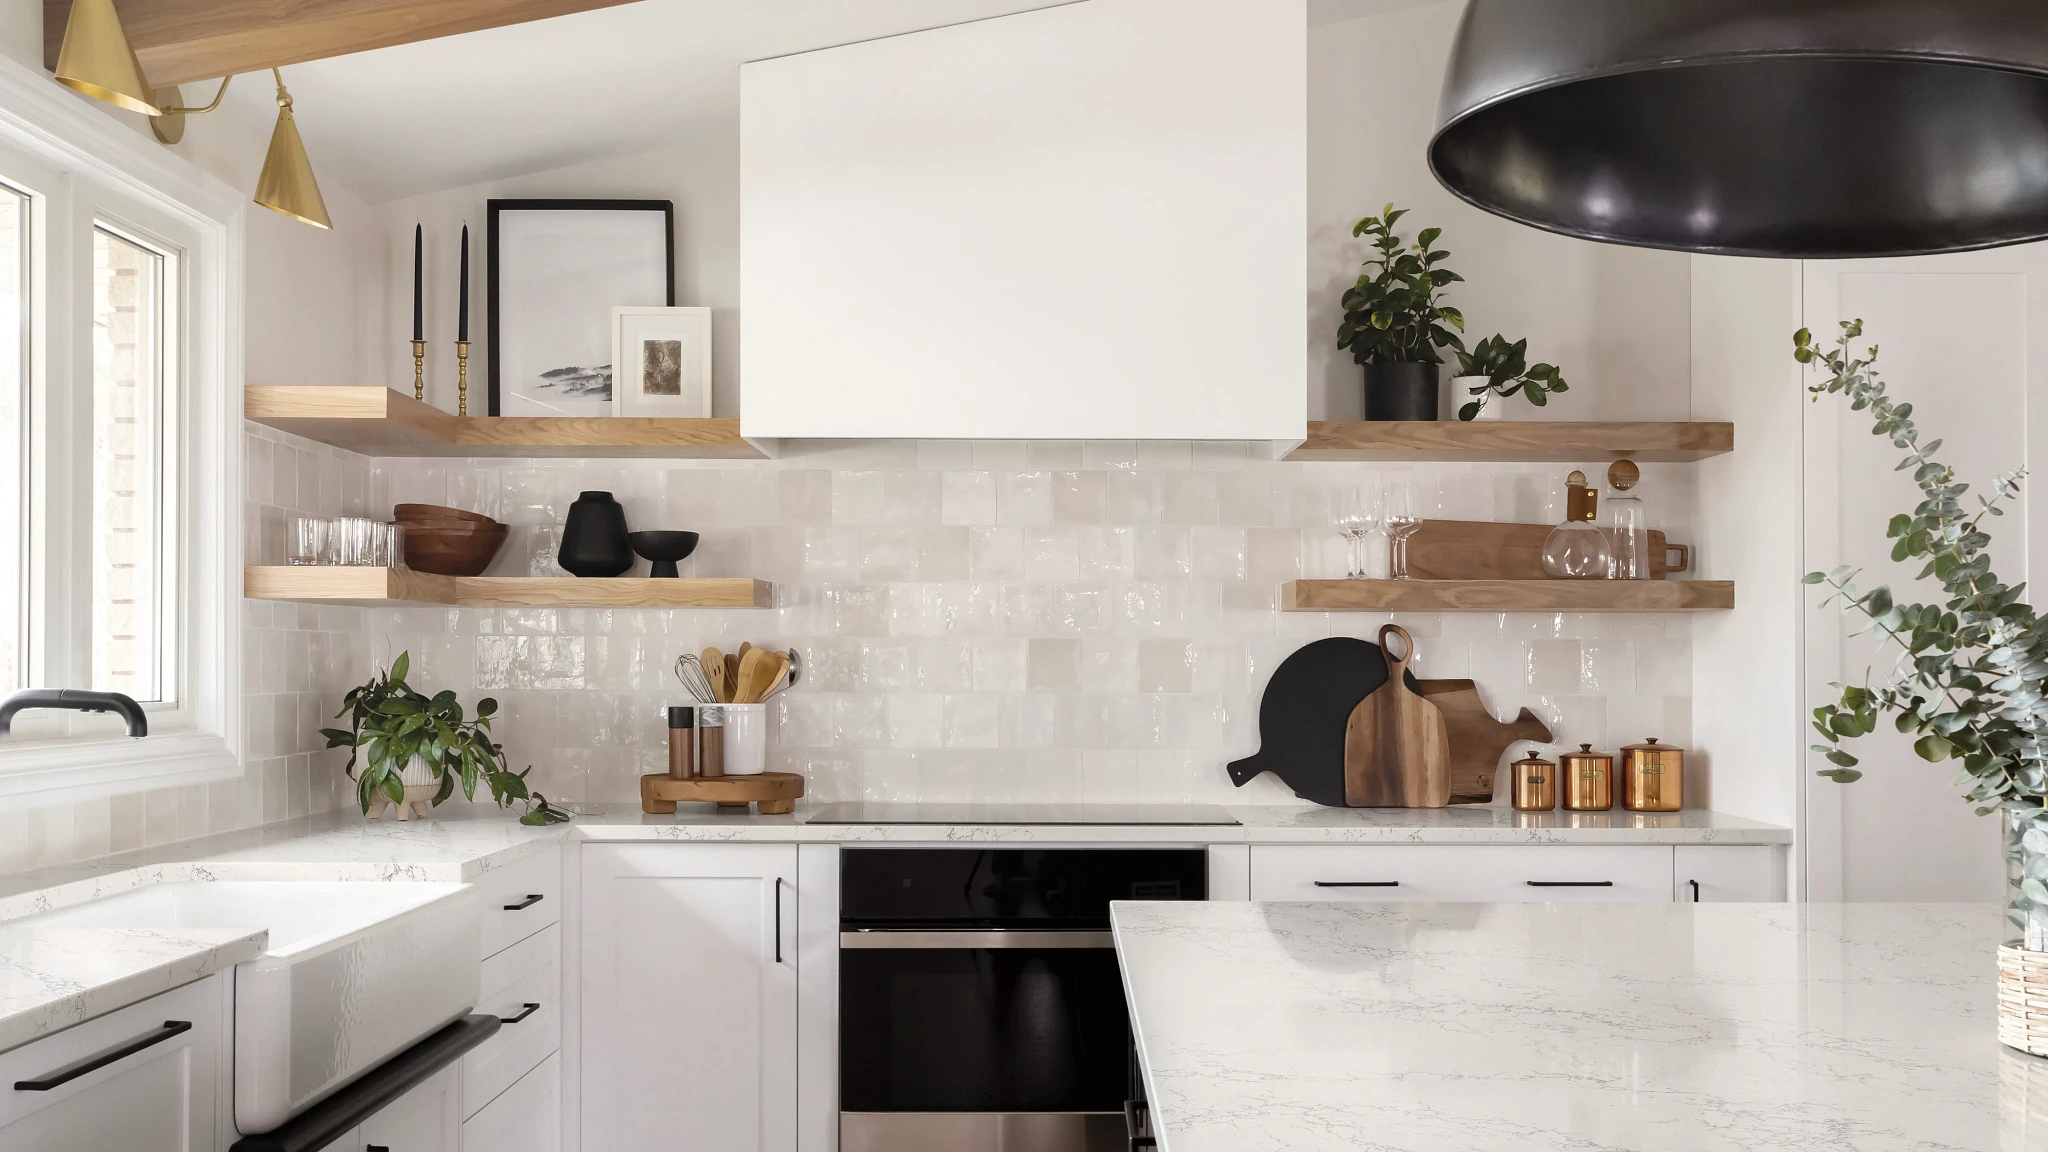 a stunning warm and white kitchen with glossy backsplash tiles, white lower cabinets, with open wooden upper cabinets, a center island, stainless steel appliances, a modern hood over the range, and white quartz countertops. 